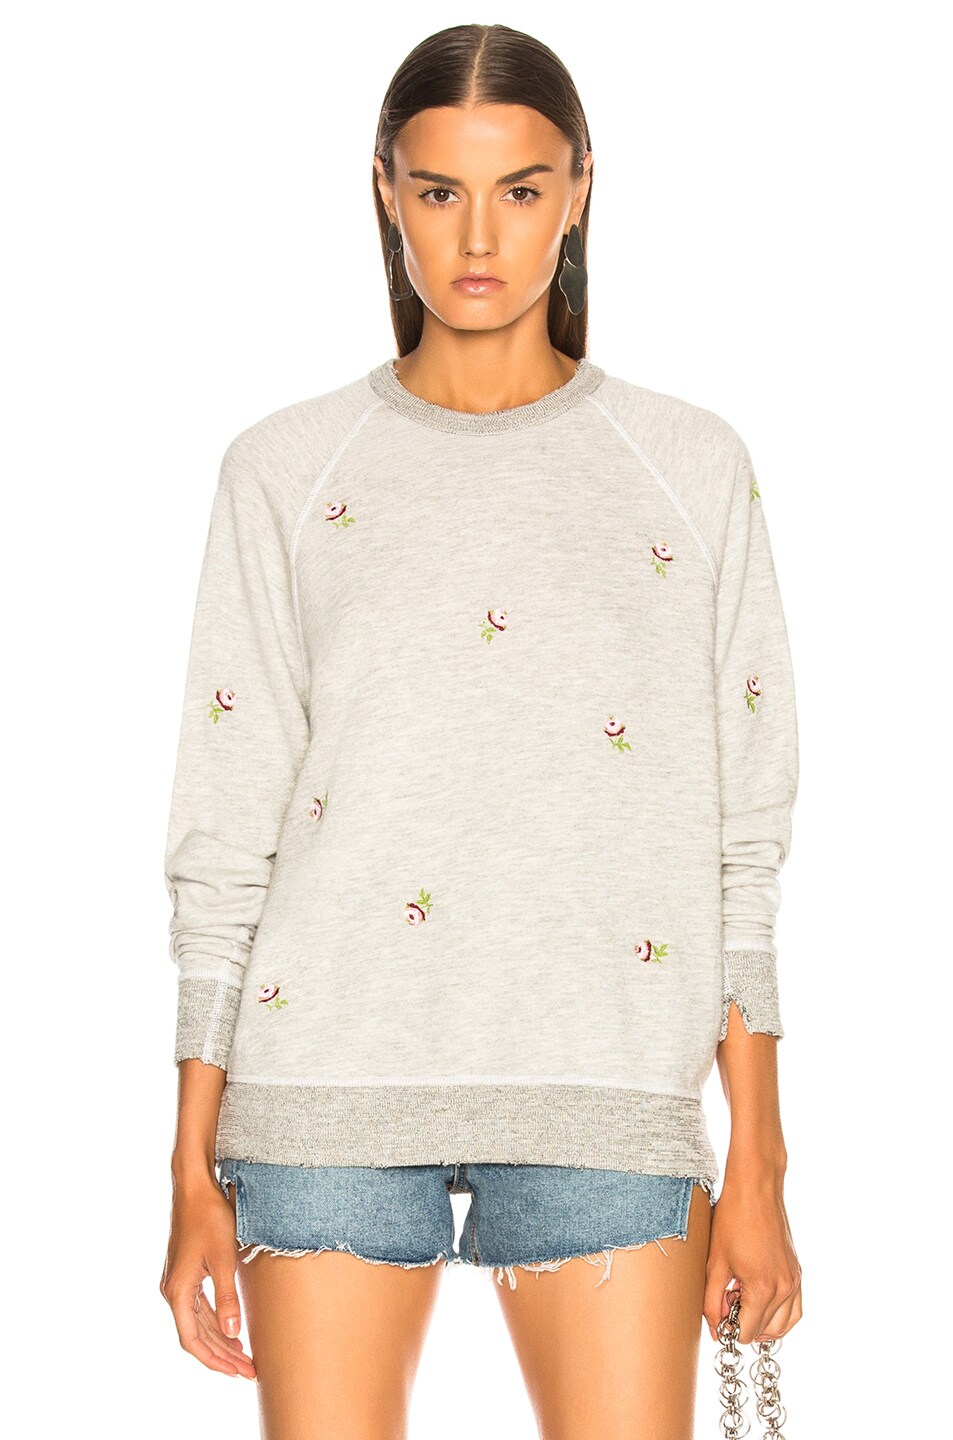 Image 1 of The Great College Sweatshirt in Heather Grey With Rosette Embroidery